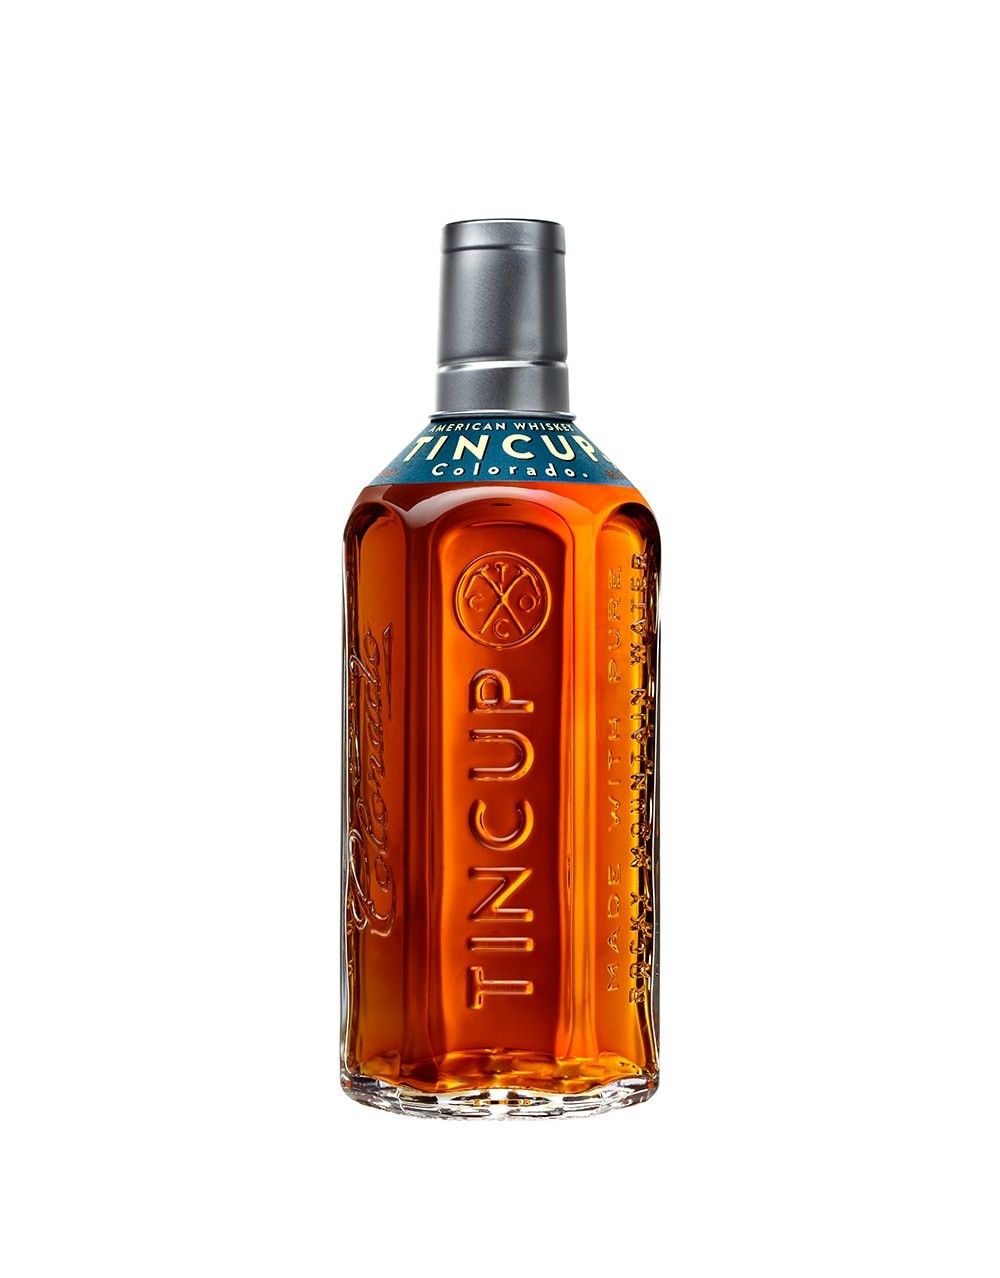 TINCUP® American Whiskey | Buy Online or Send as a Gift